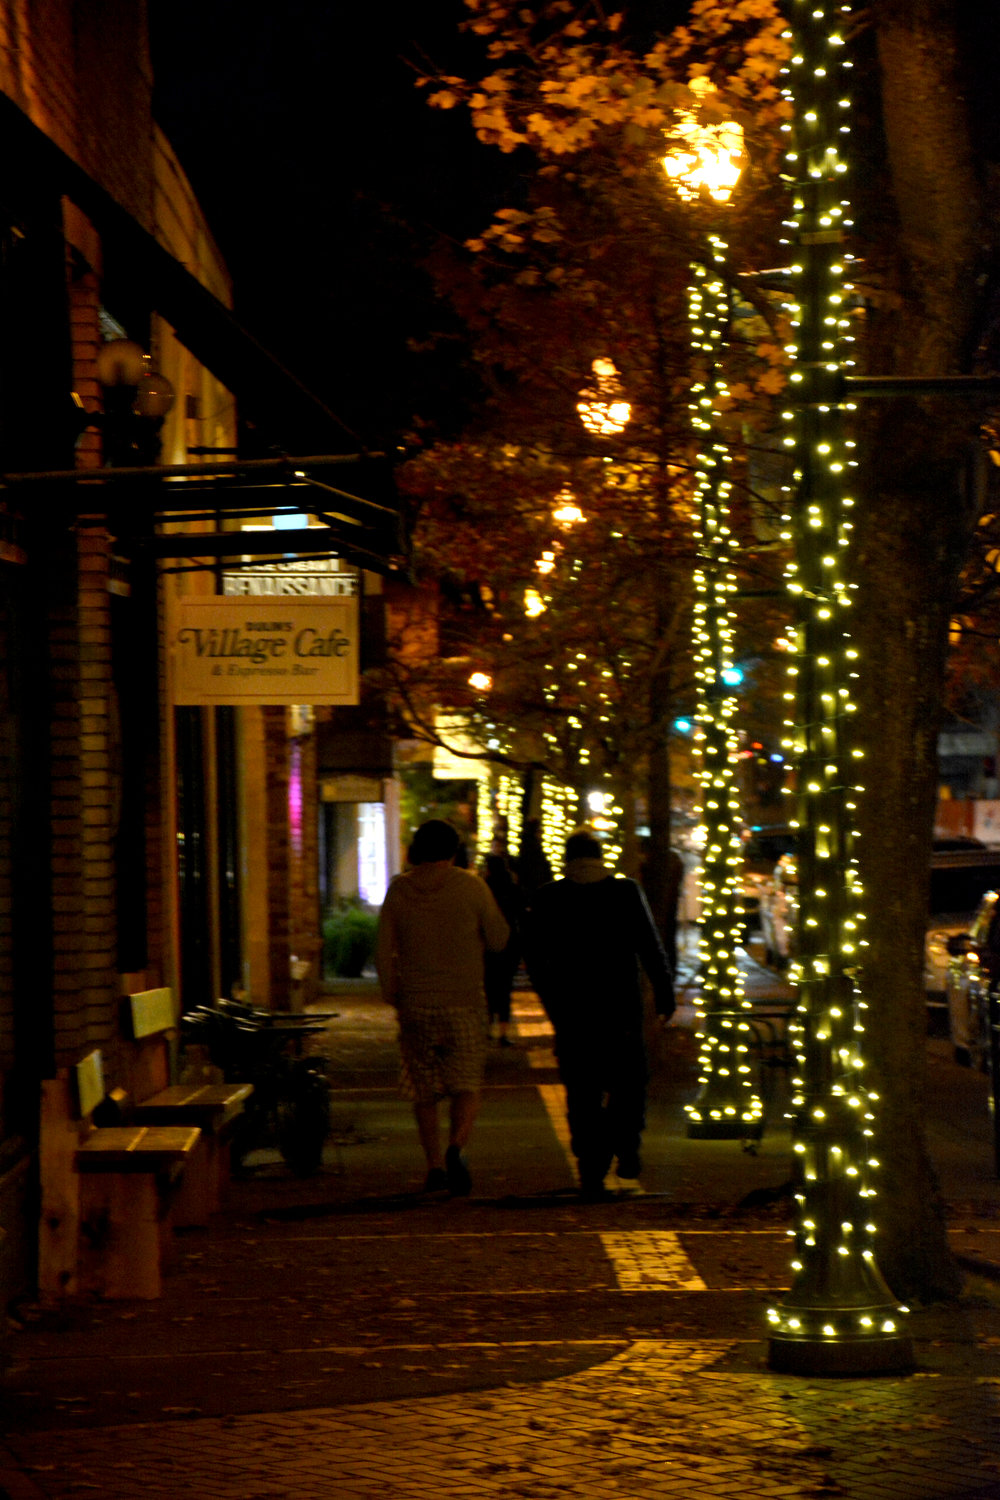 People walk down the sidewalk of Main Street in the Uptown Village, illuminated by recently strung Christmas lights. The Uptown Village Association raised close to $7,000 to pay for the lights and installation, part of their efforts to celebrate the holidays.